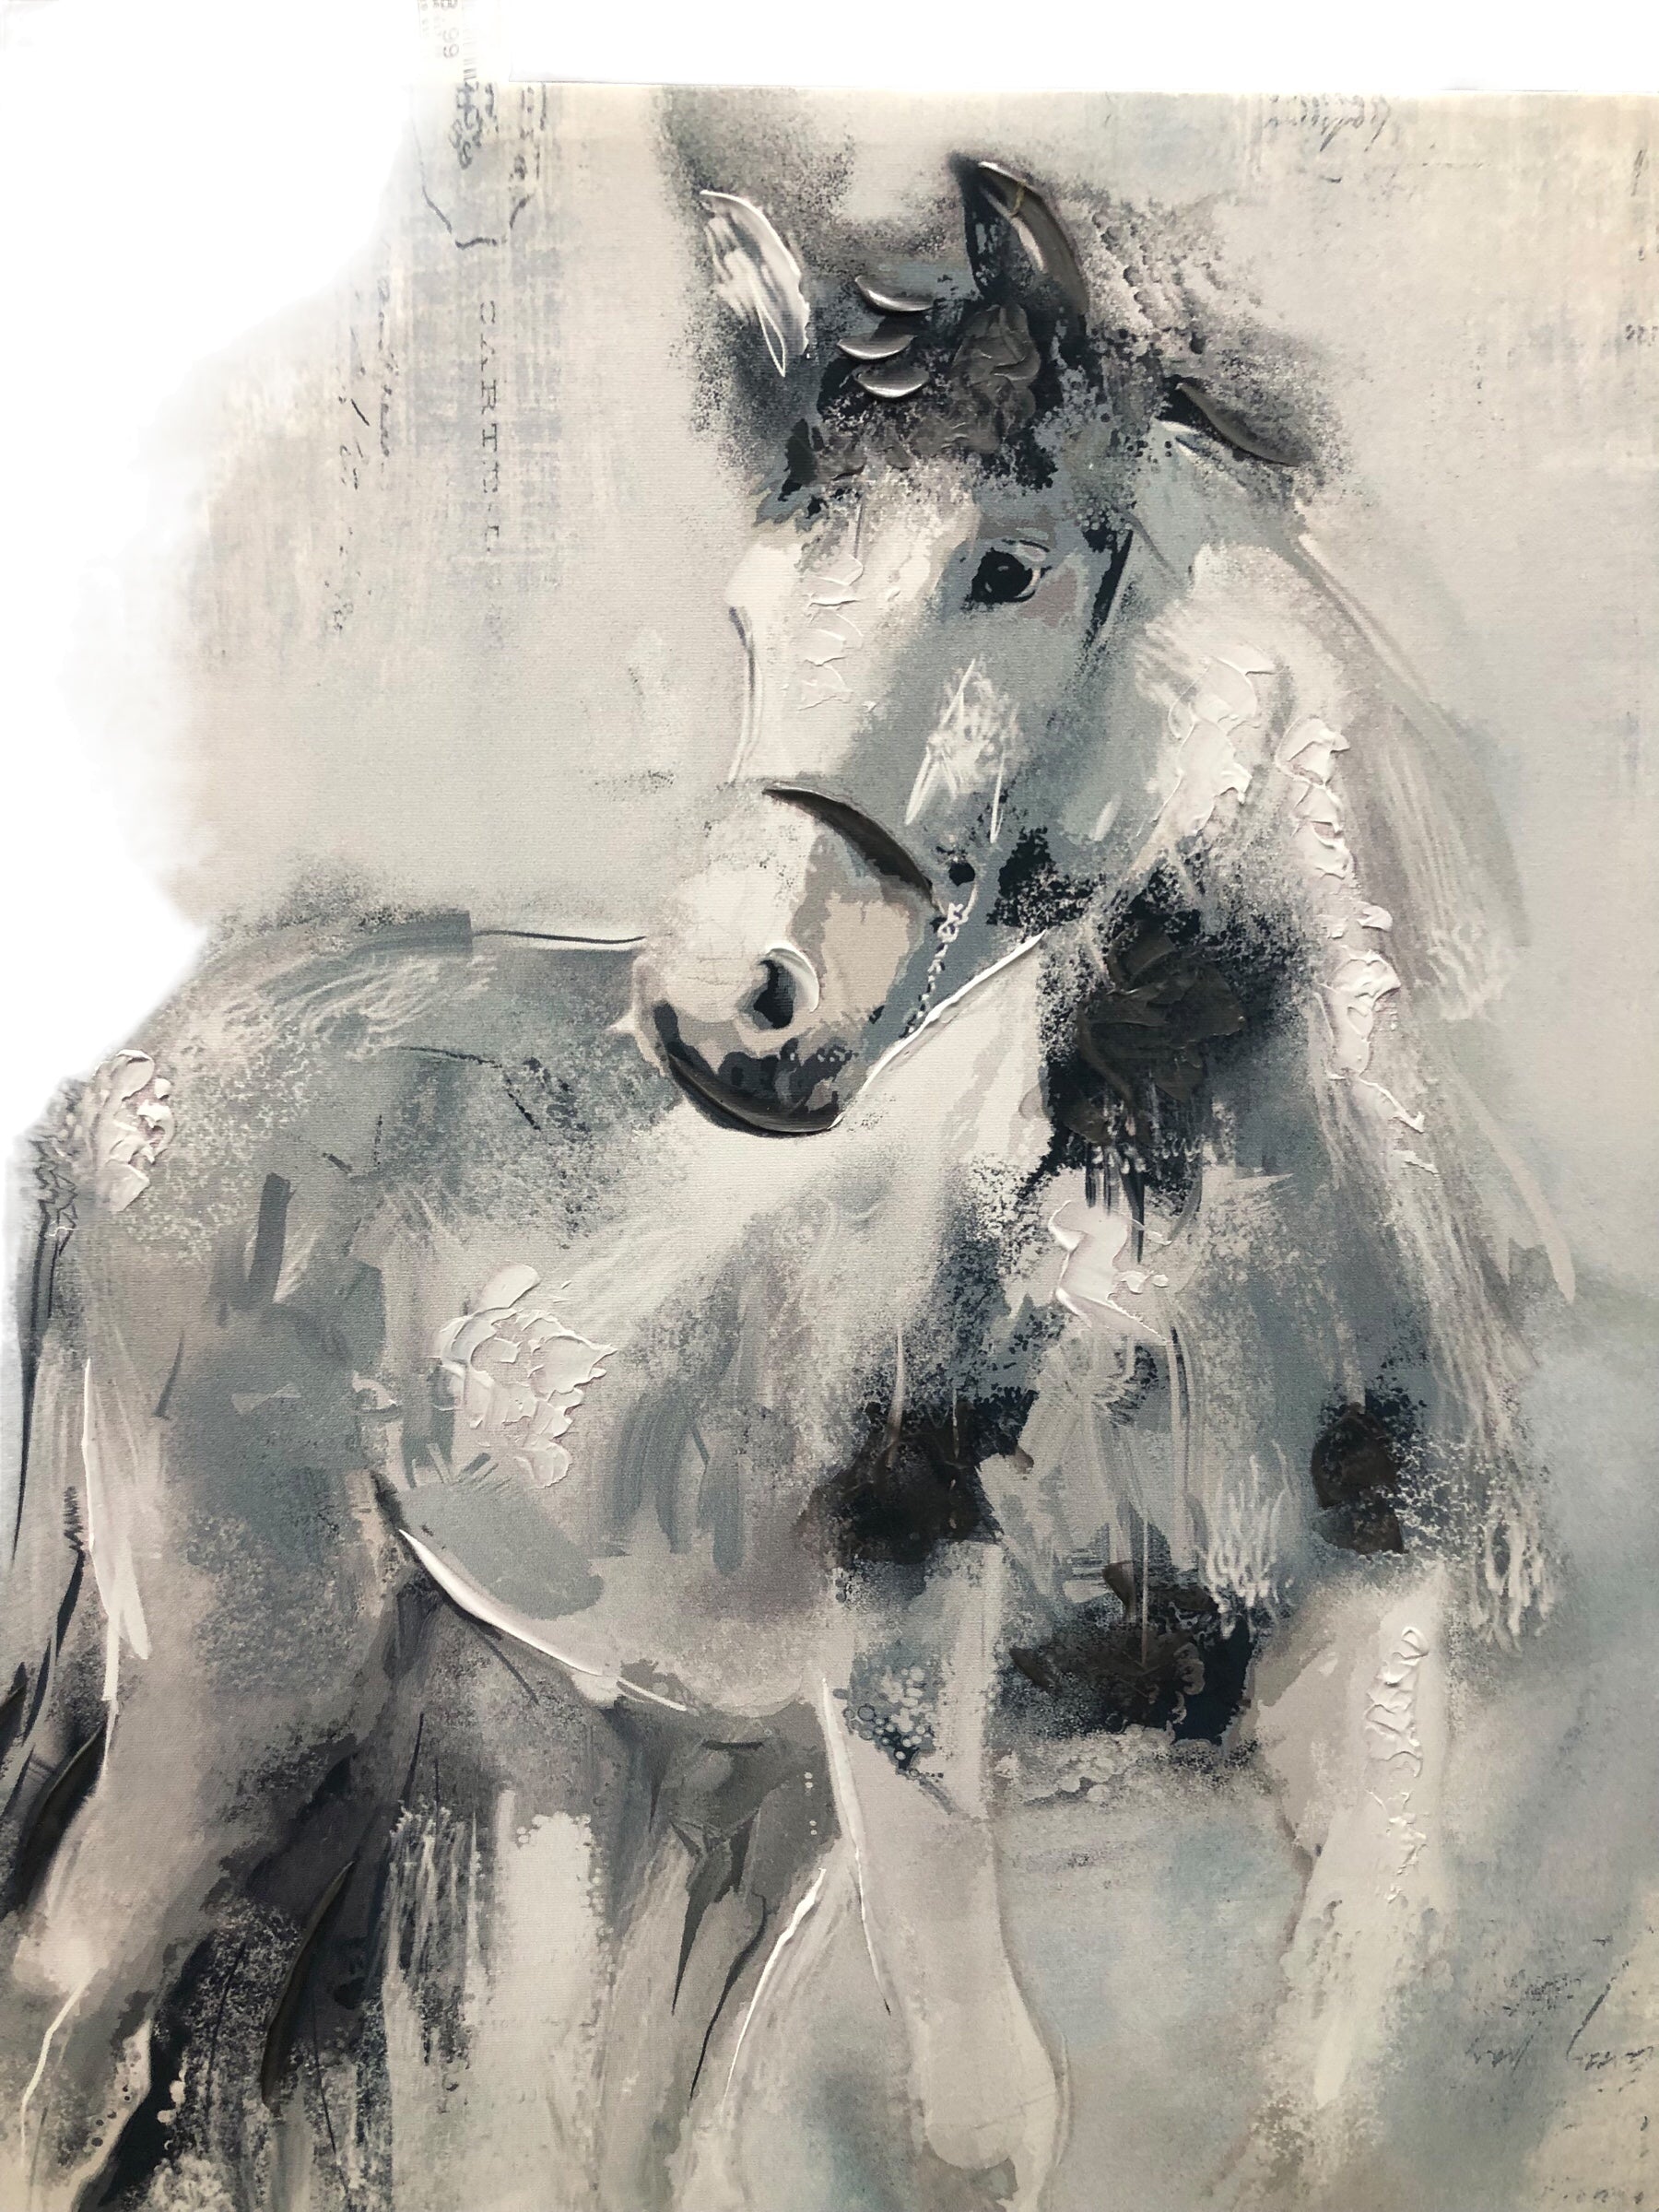 Blue/white painted horse